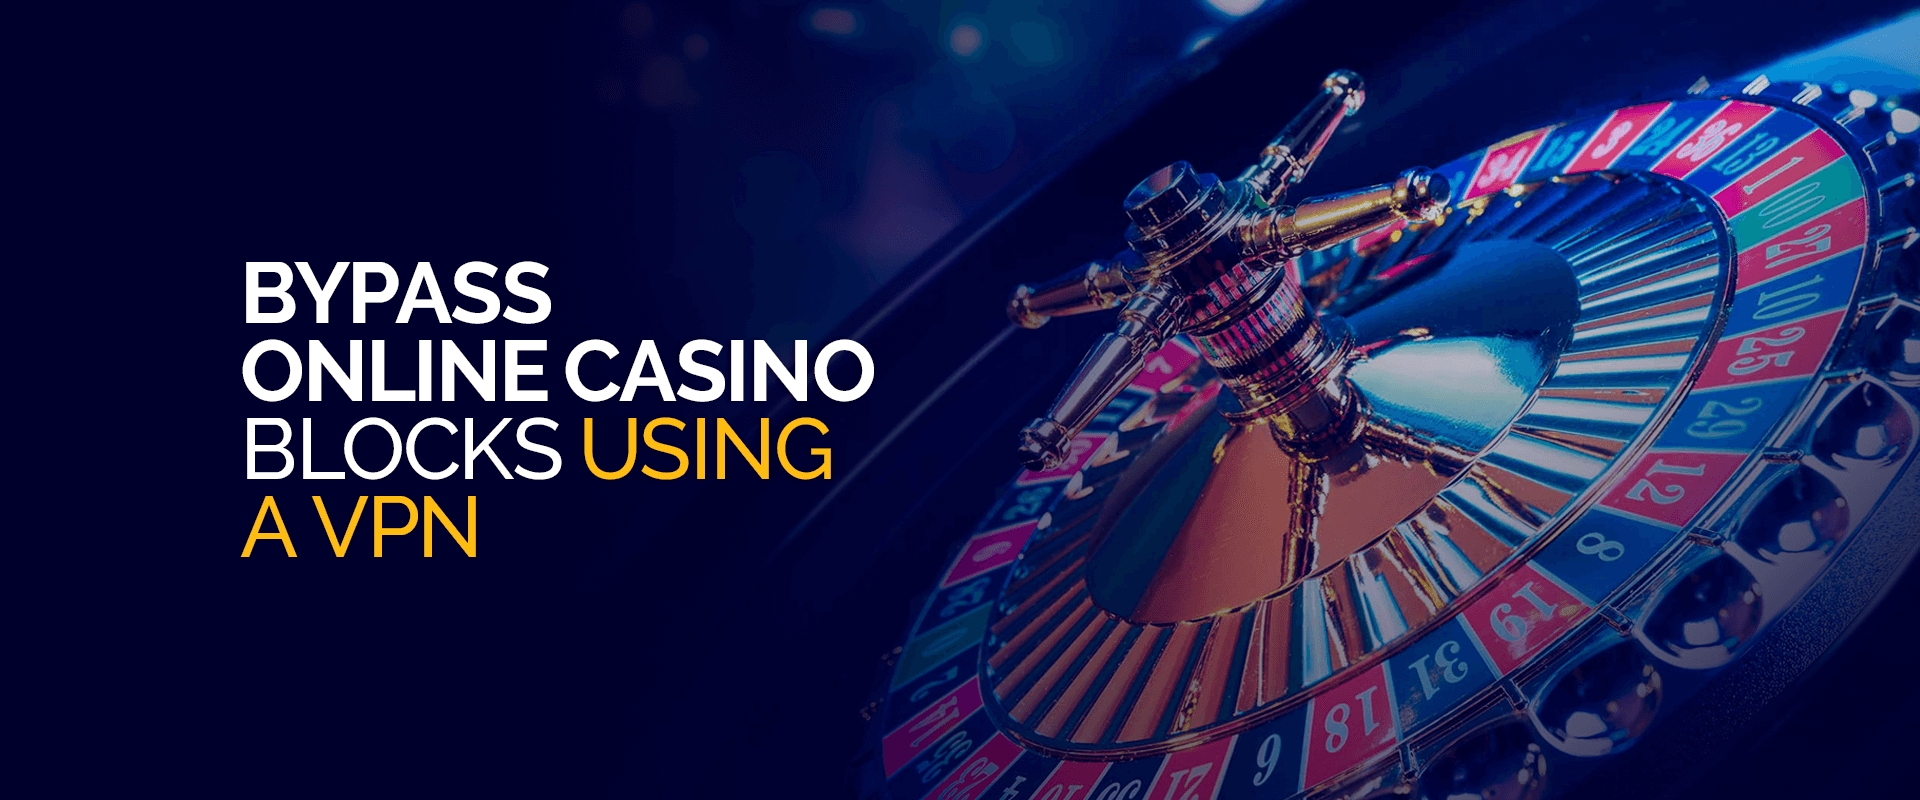 Revolutionize Your Tips for Managing Your Bankroll at Indian Online Casinos With These Easy-peasy Tips